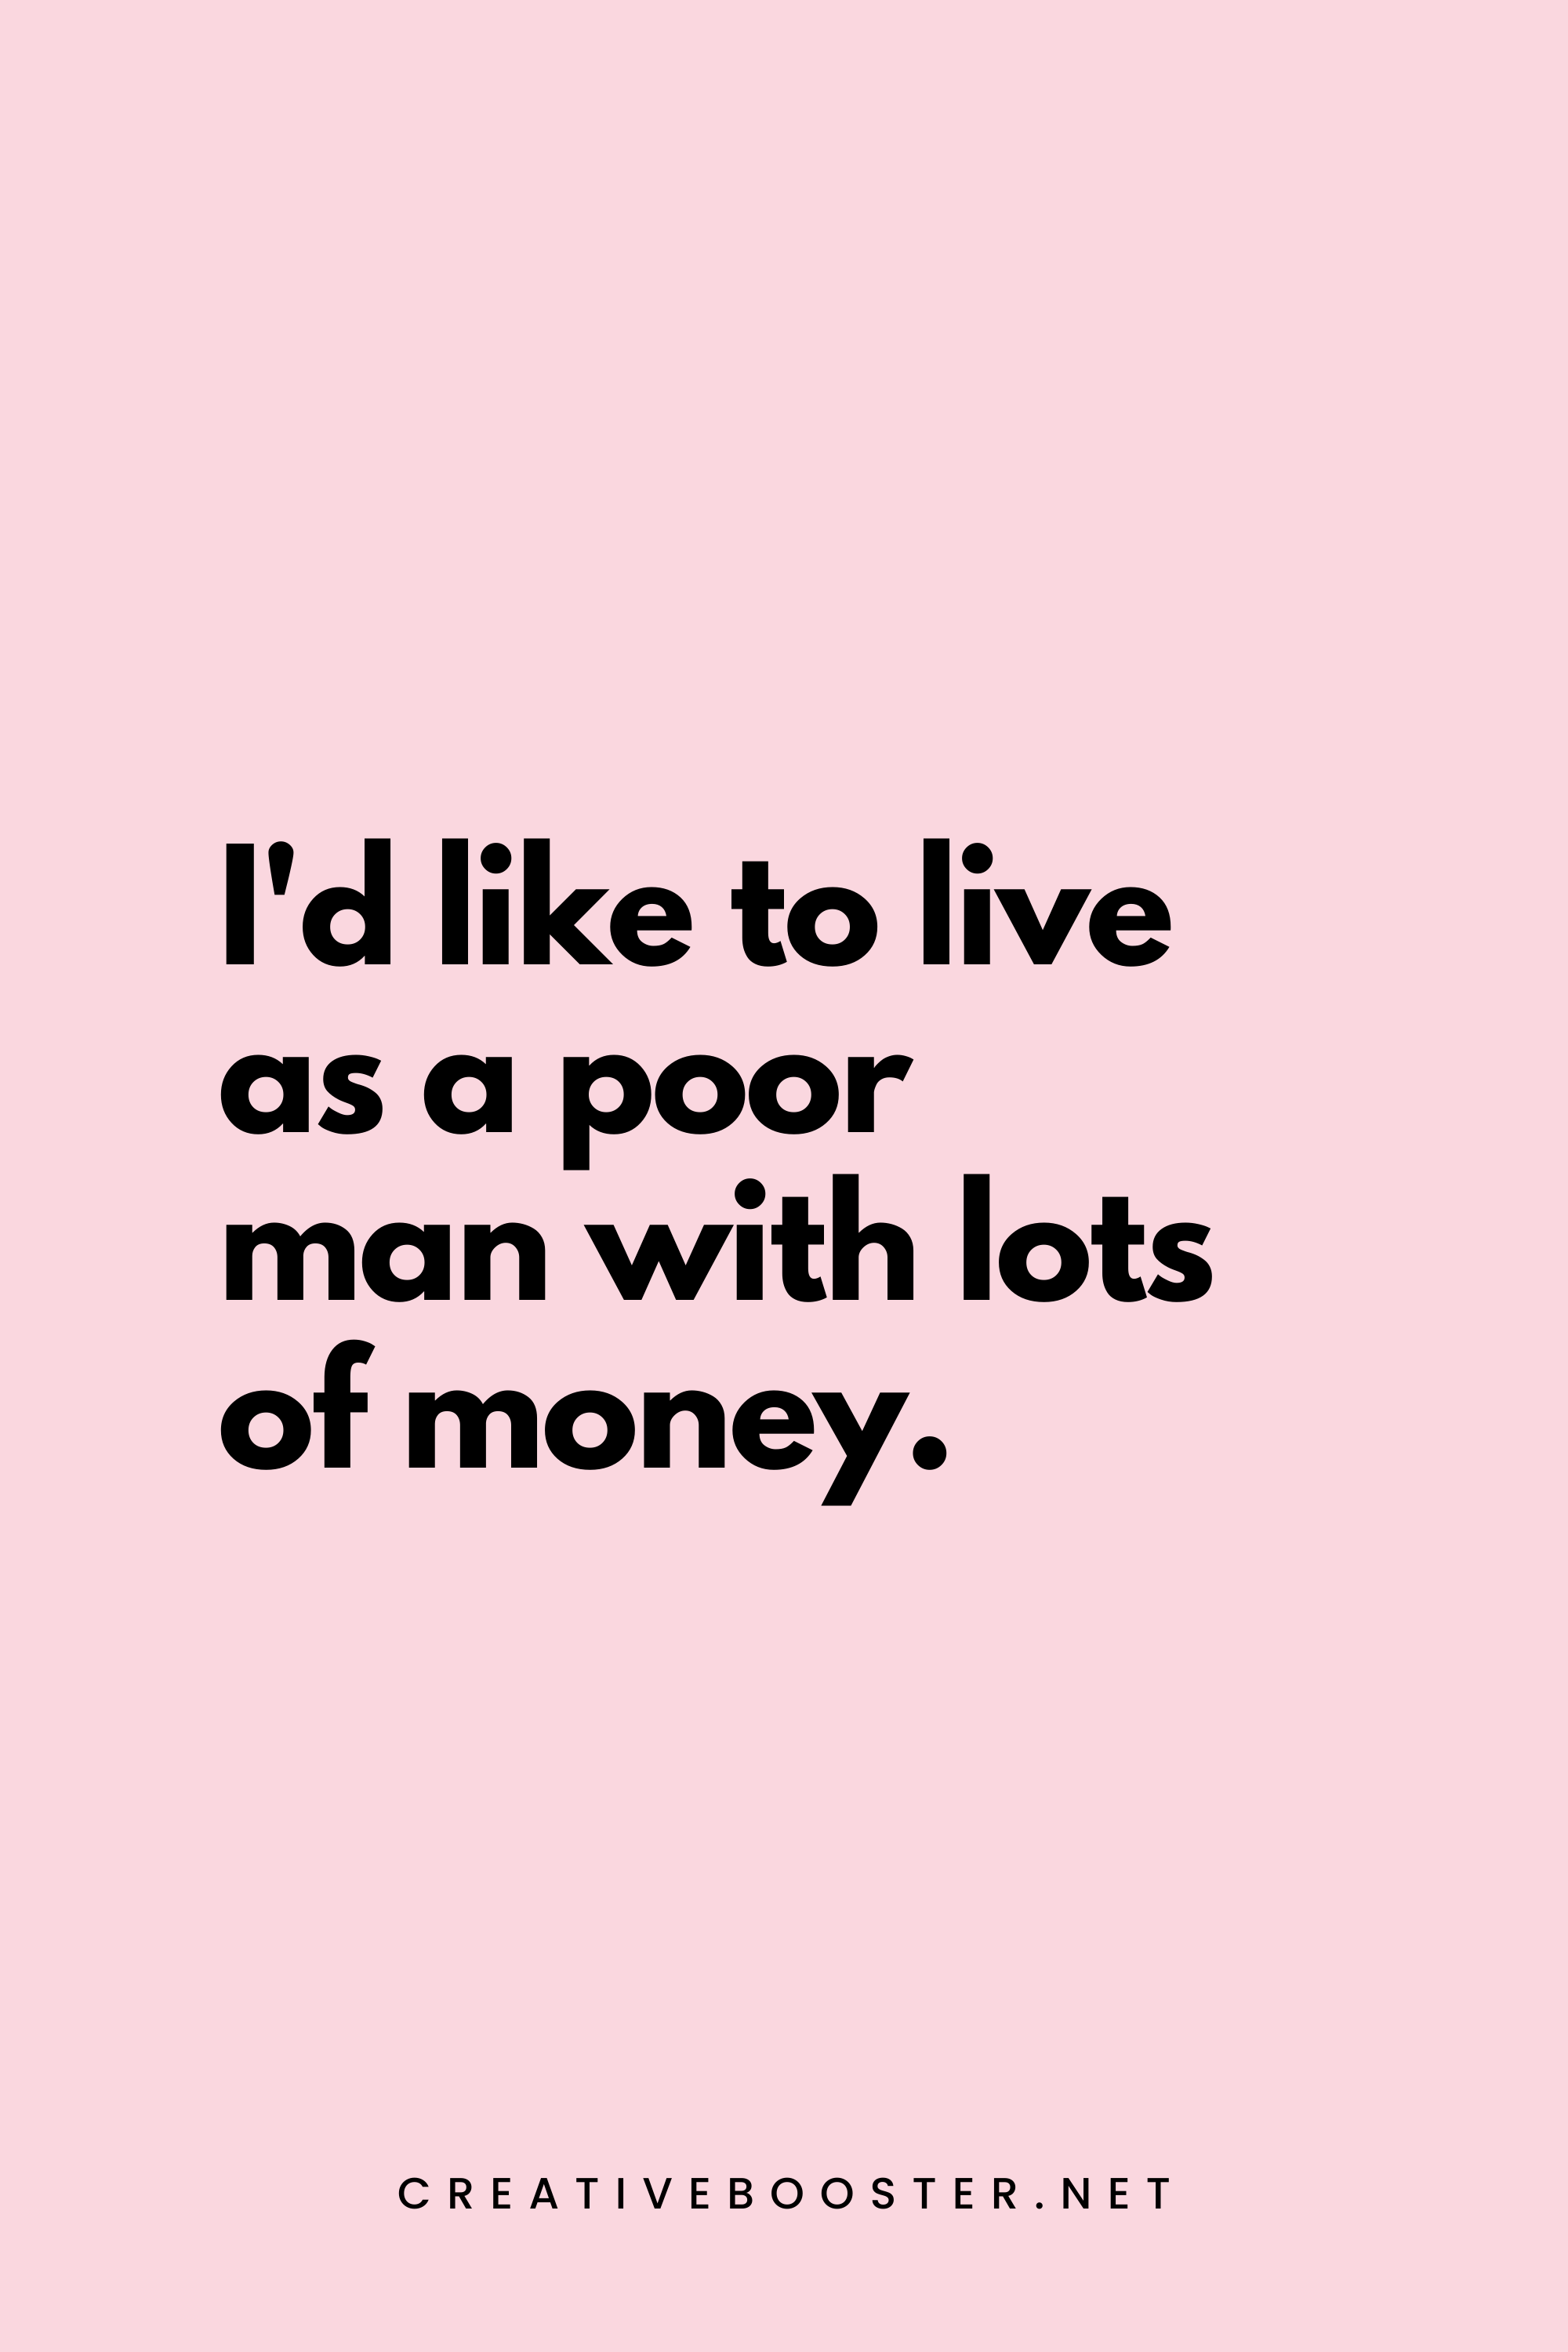 12. I'd like to live as a poor man with lots of money. - Pablo Picasso - 1. Popular Financial Freedom Quotes